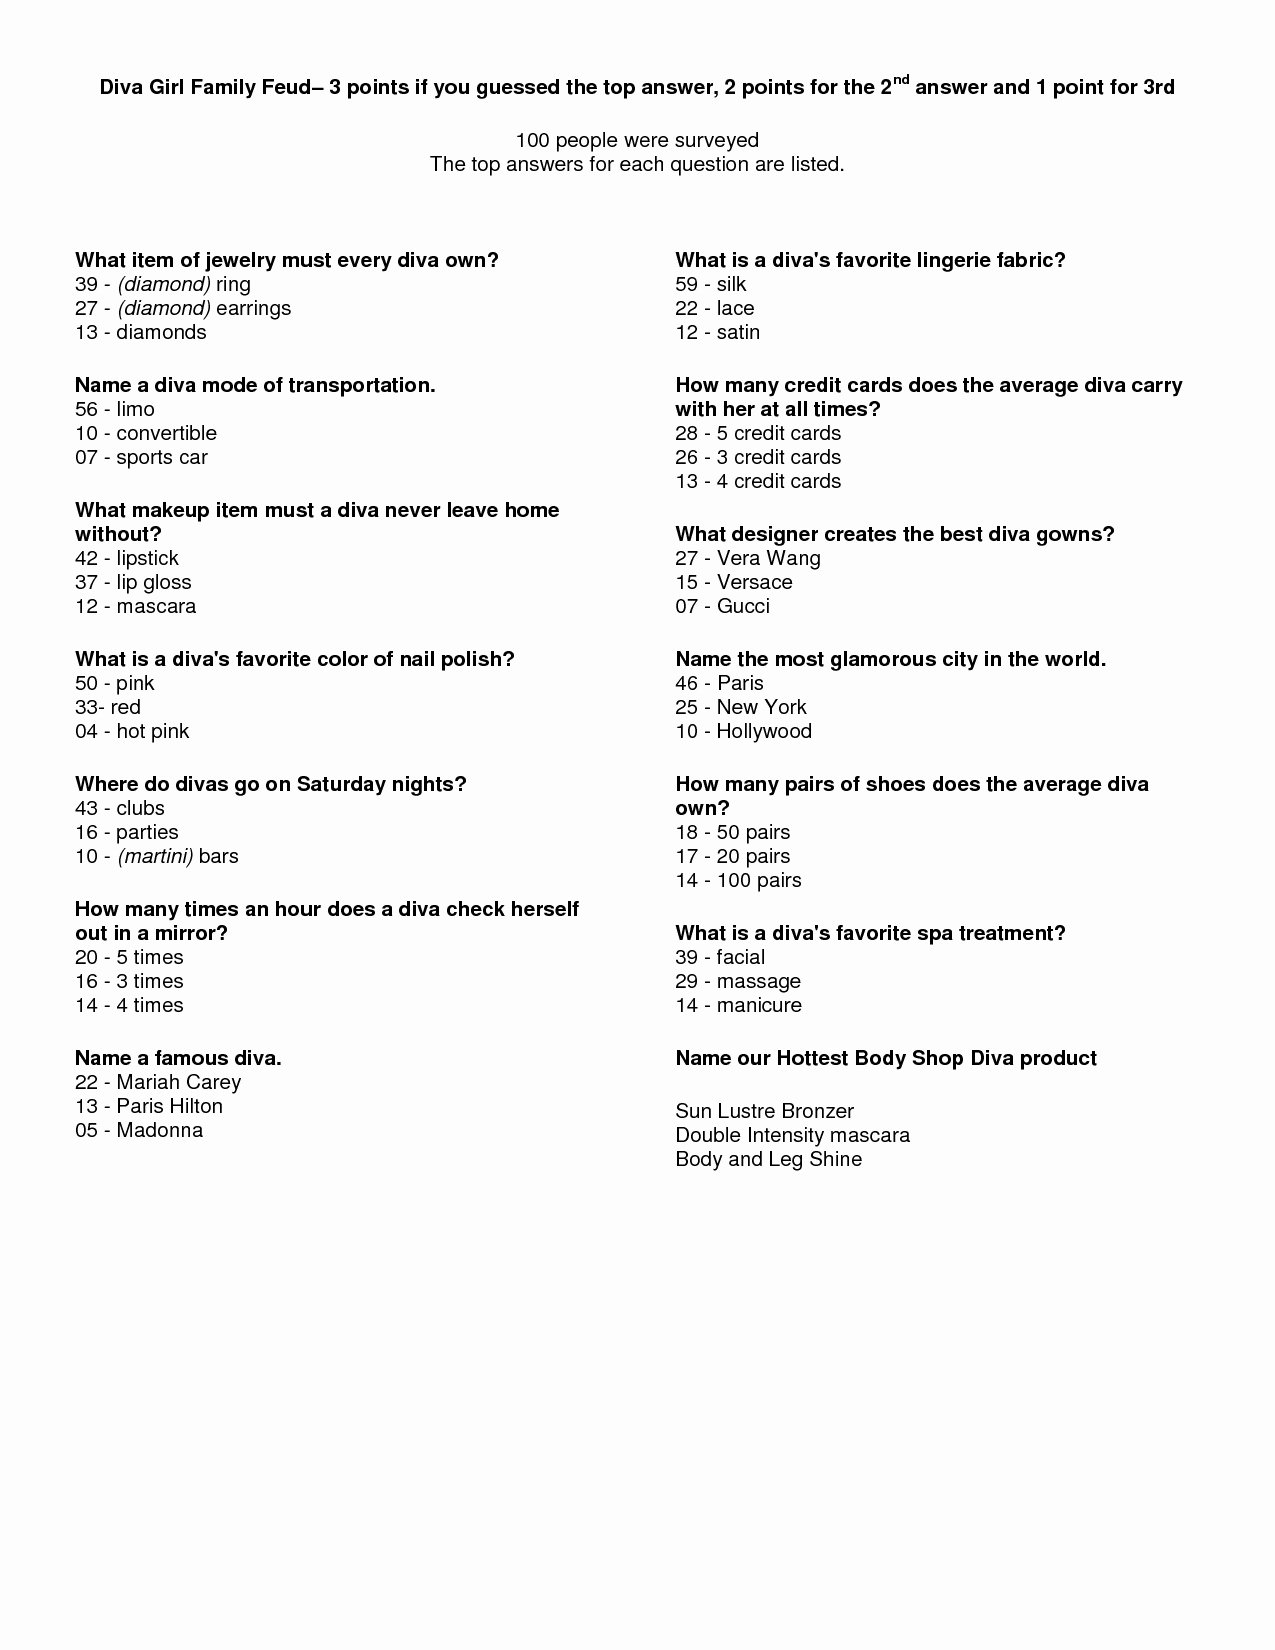 Bible Family Feud Questions Inspirational Family Feud Questions and Answers Printable